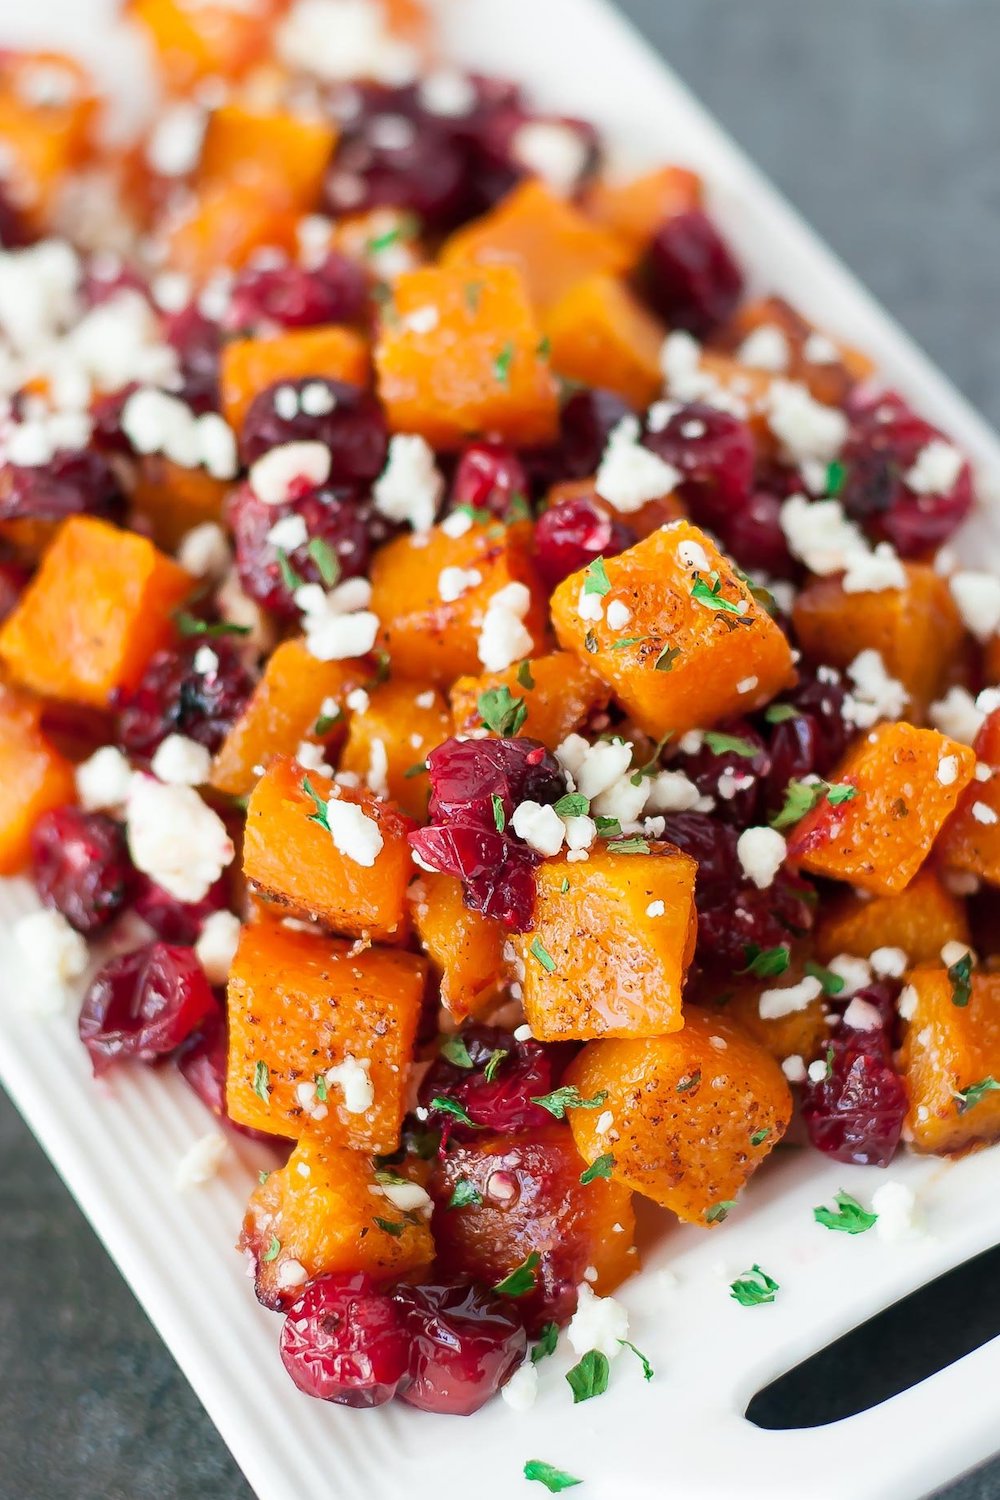 25 Amazing Butternut Squash Recipes You Need to Try This Fall + Winter - Even Desserts!